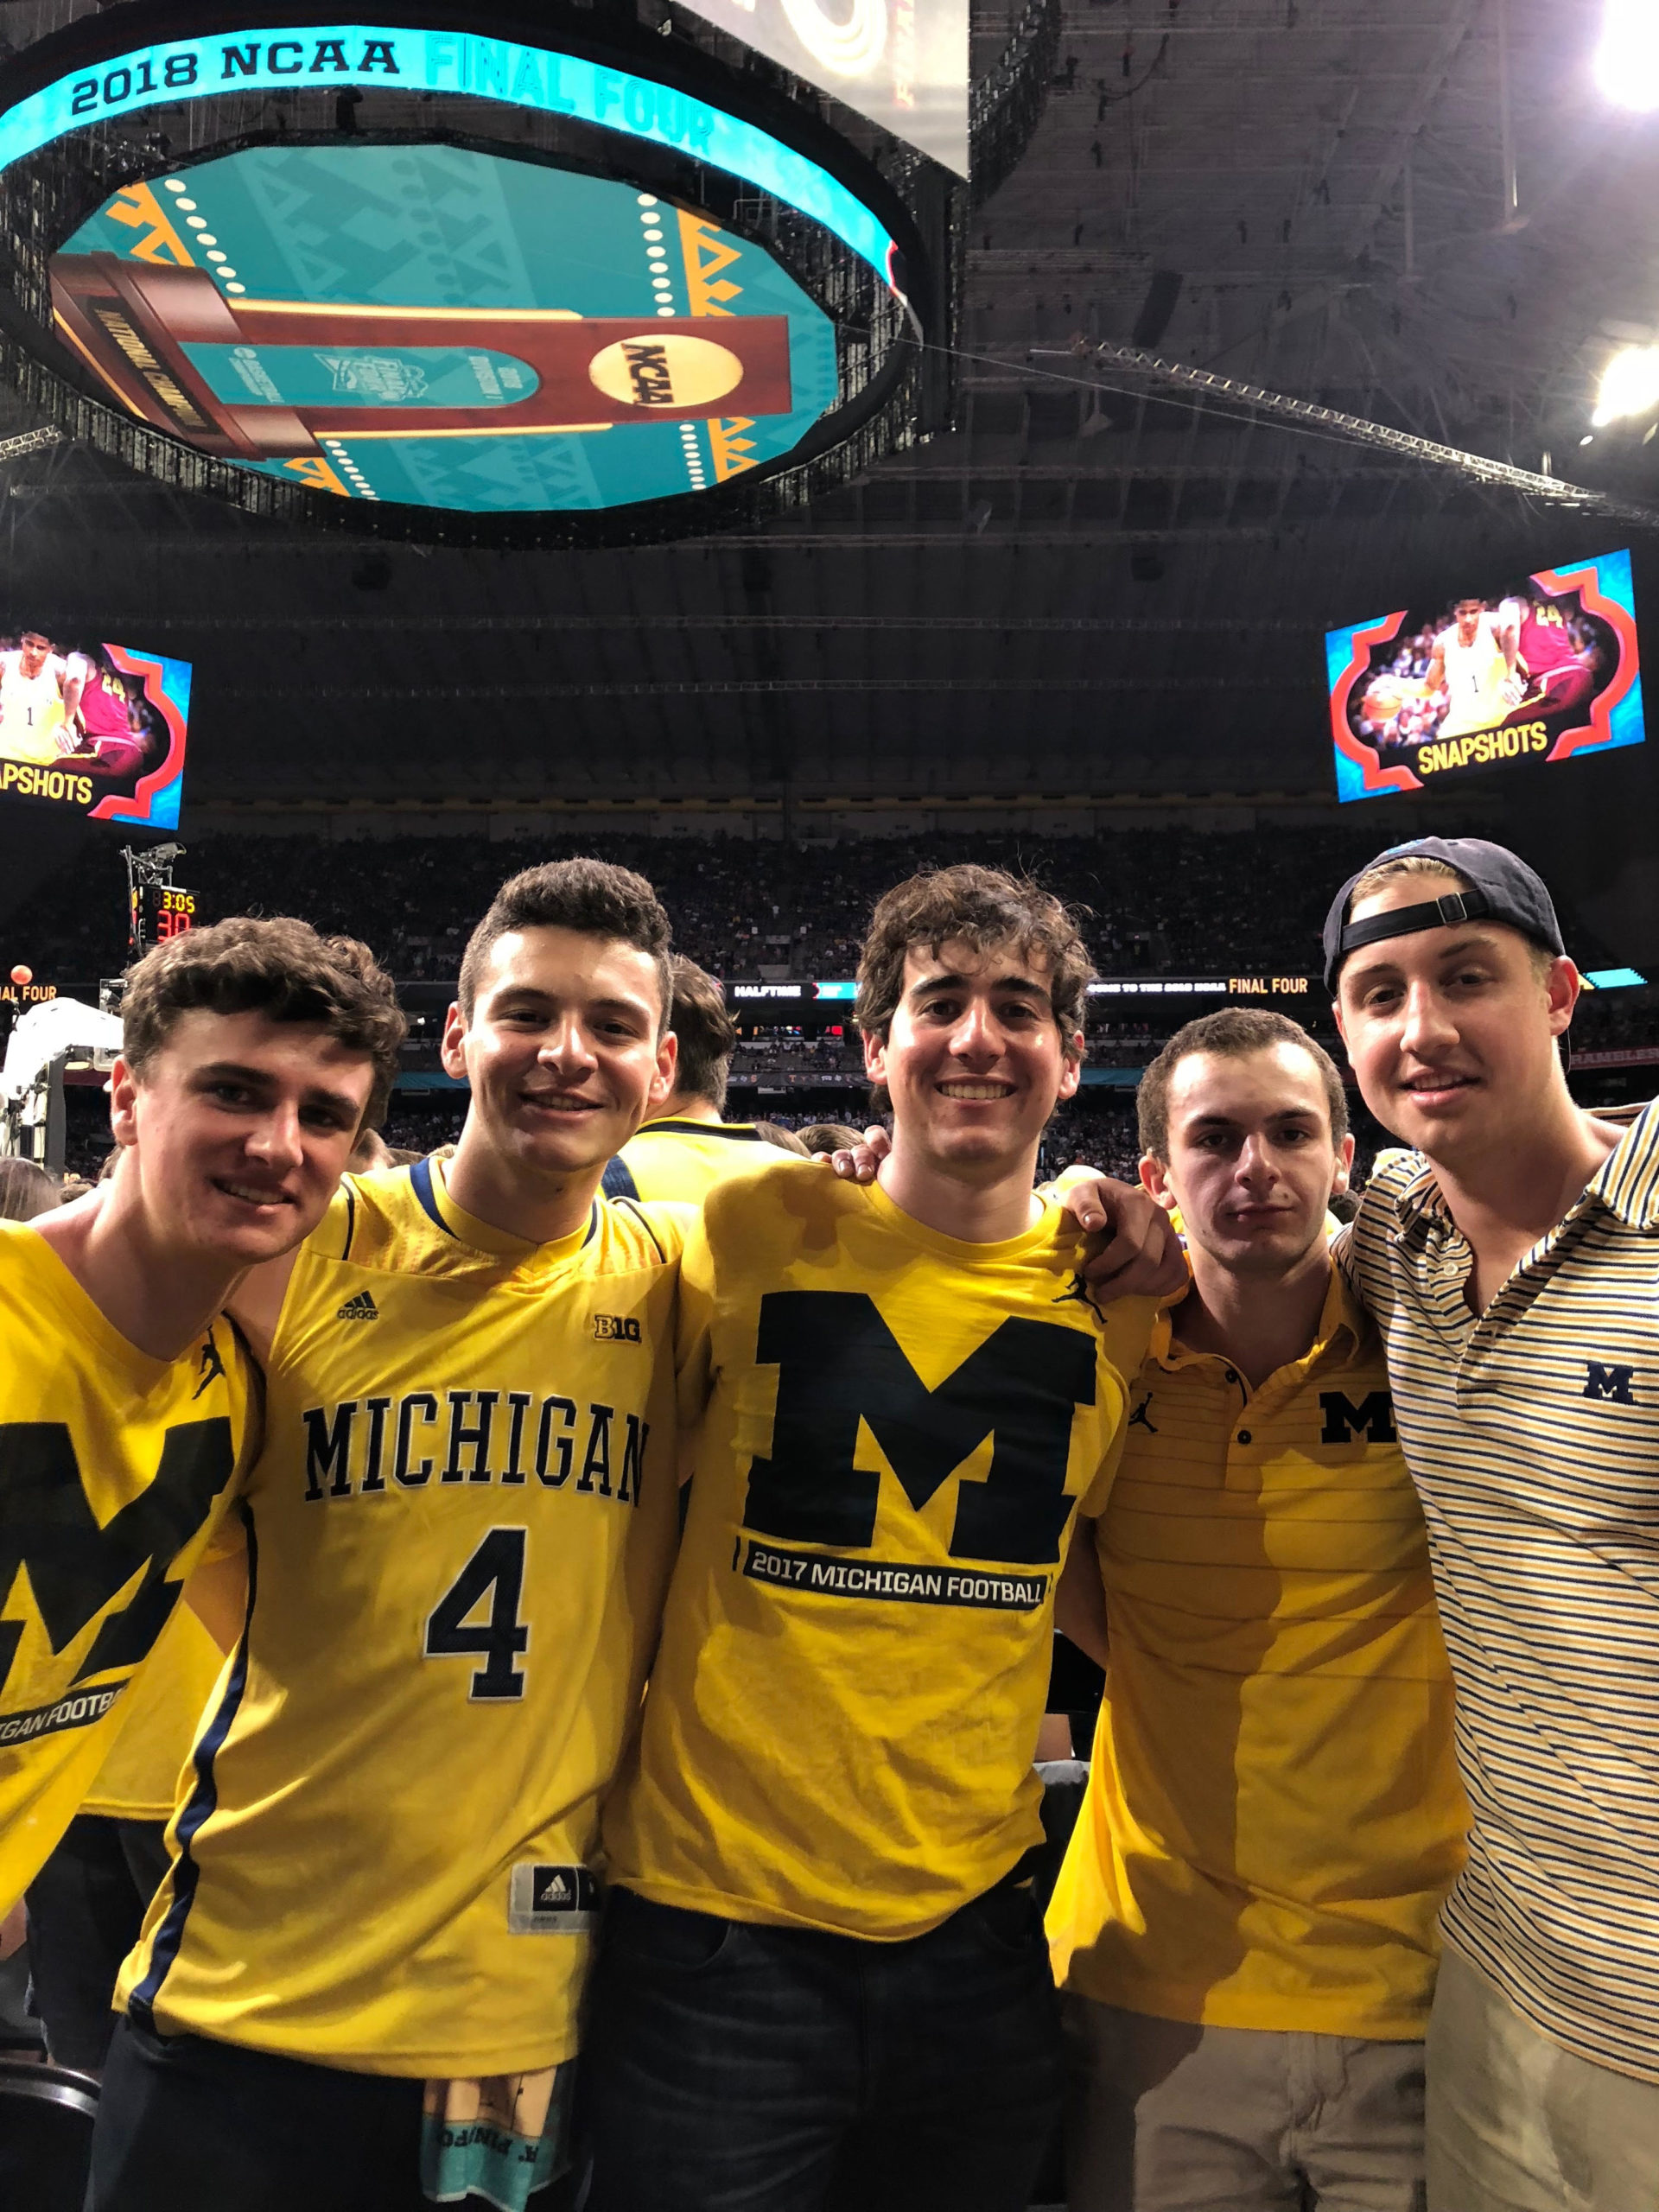 Nicholas and friends at a basketball game